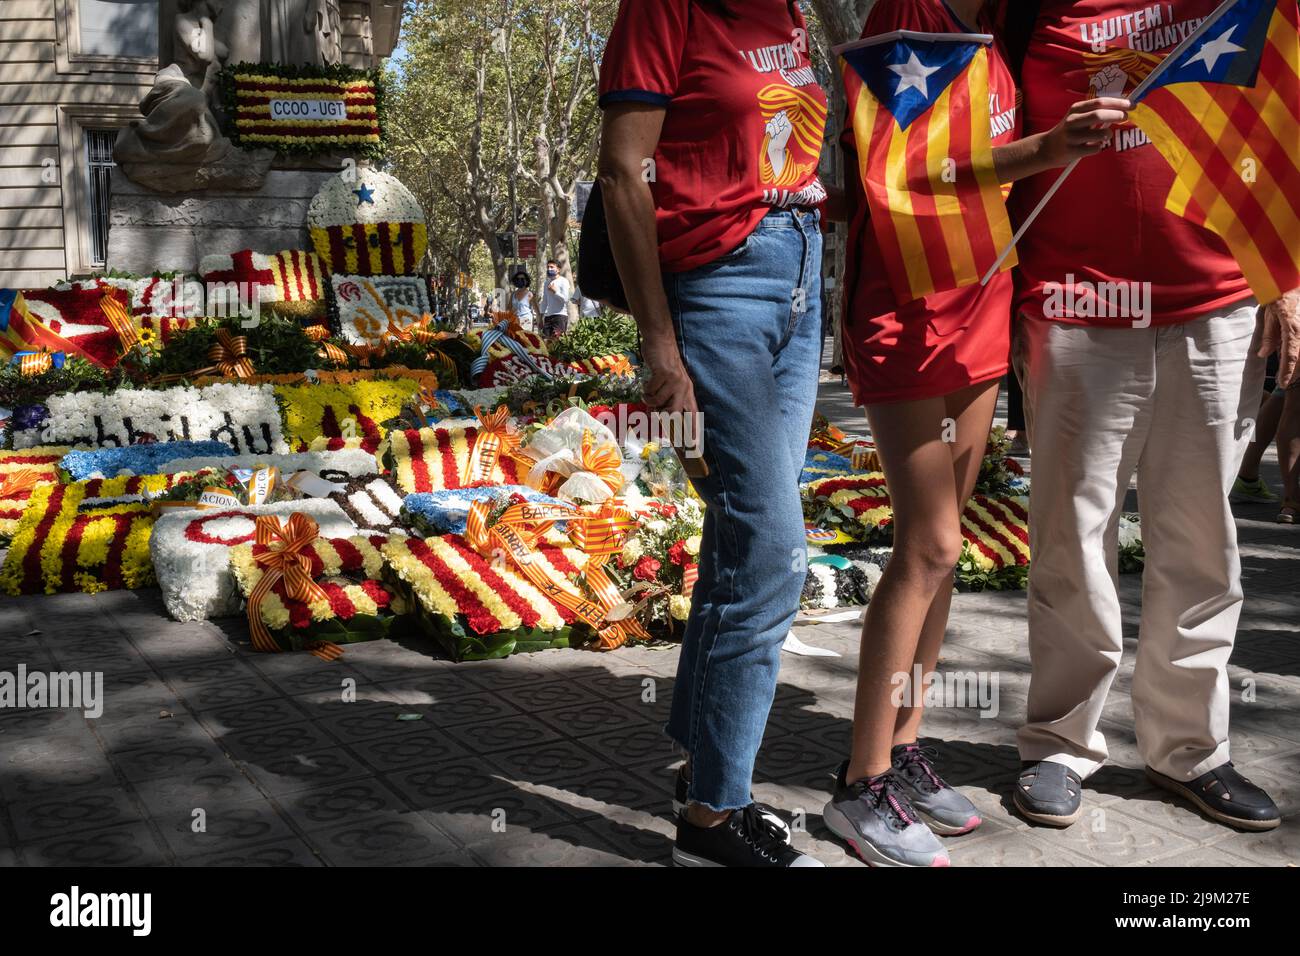 Barcelona, Catalonia, Spain. September 11th: National Day of Catalonia. Unrecognizable people posing in front of the floral offerings. Stock Photo